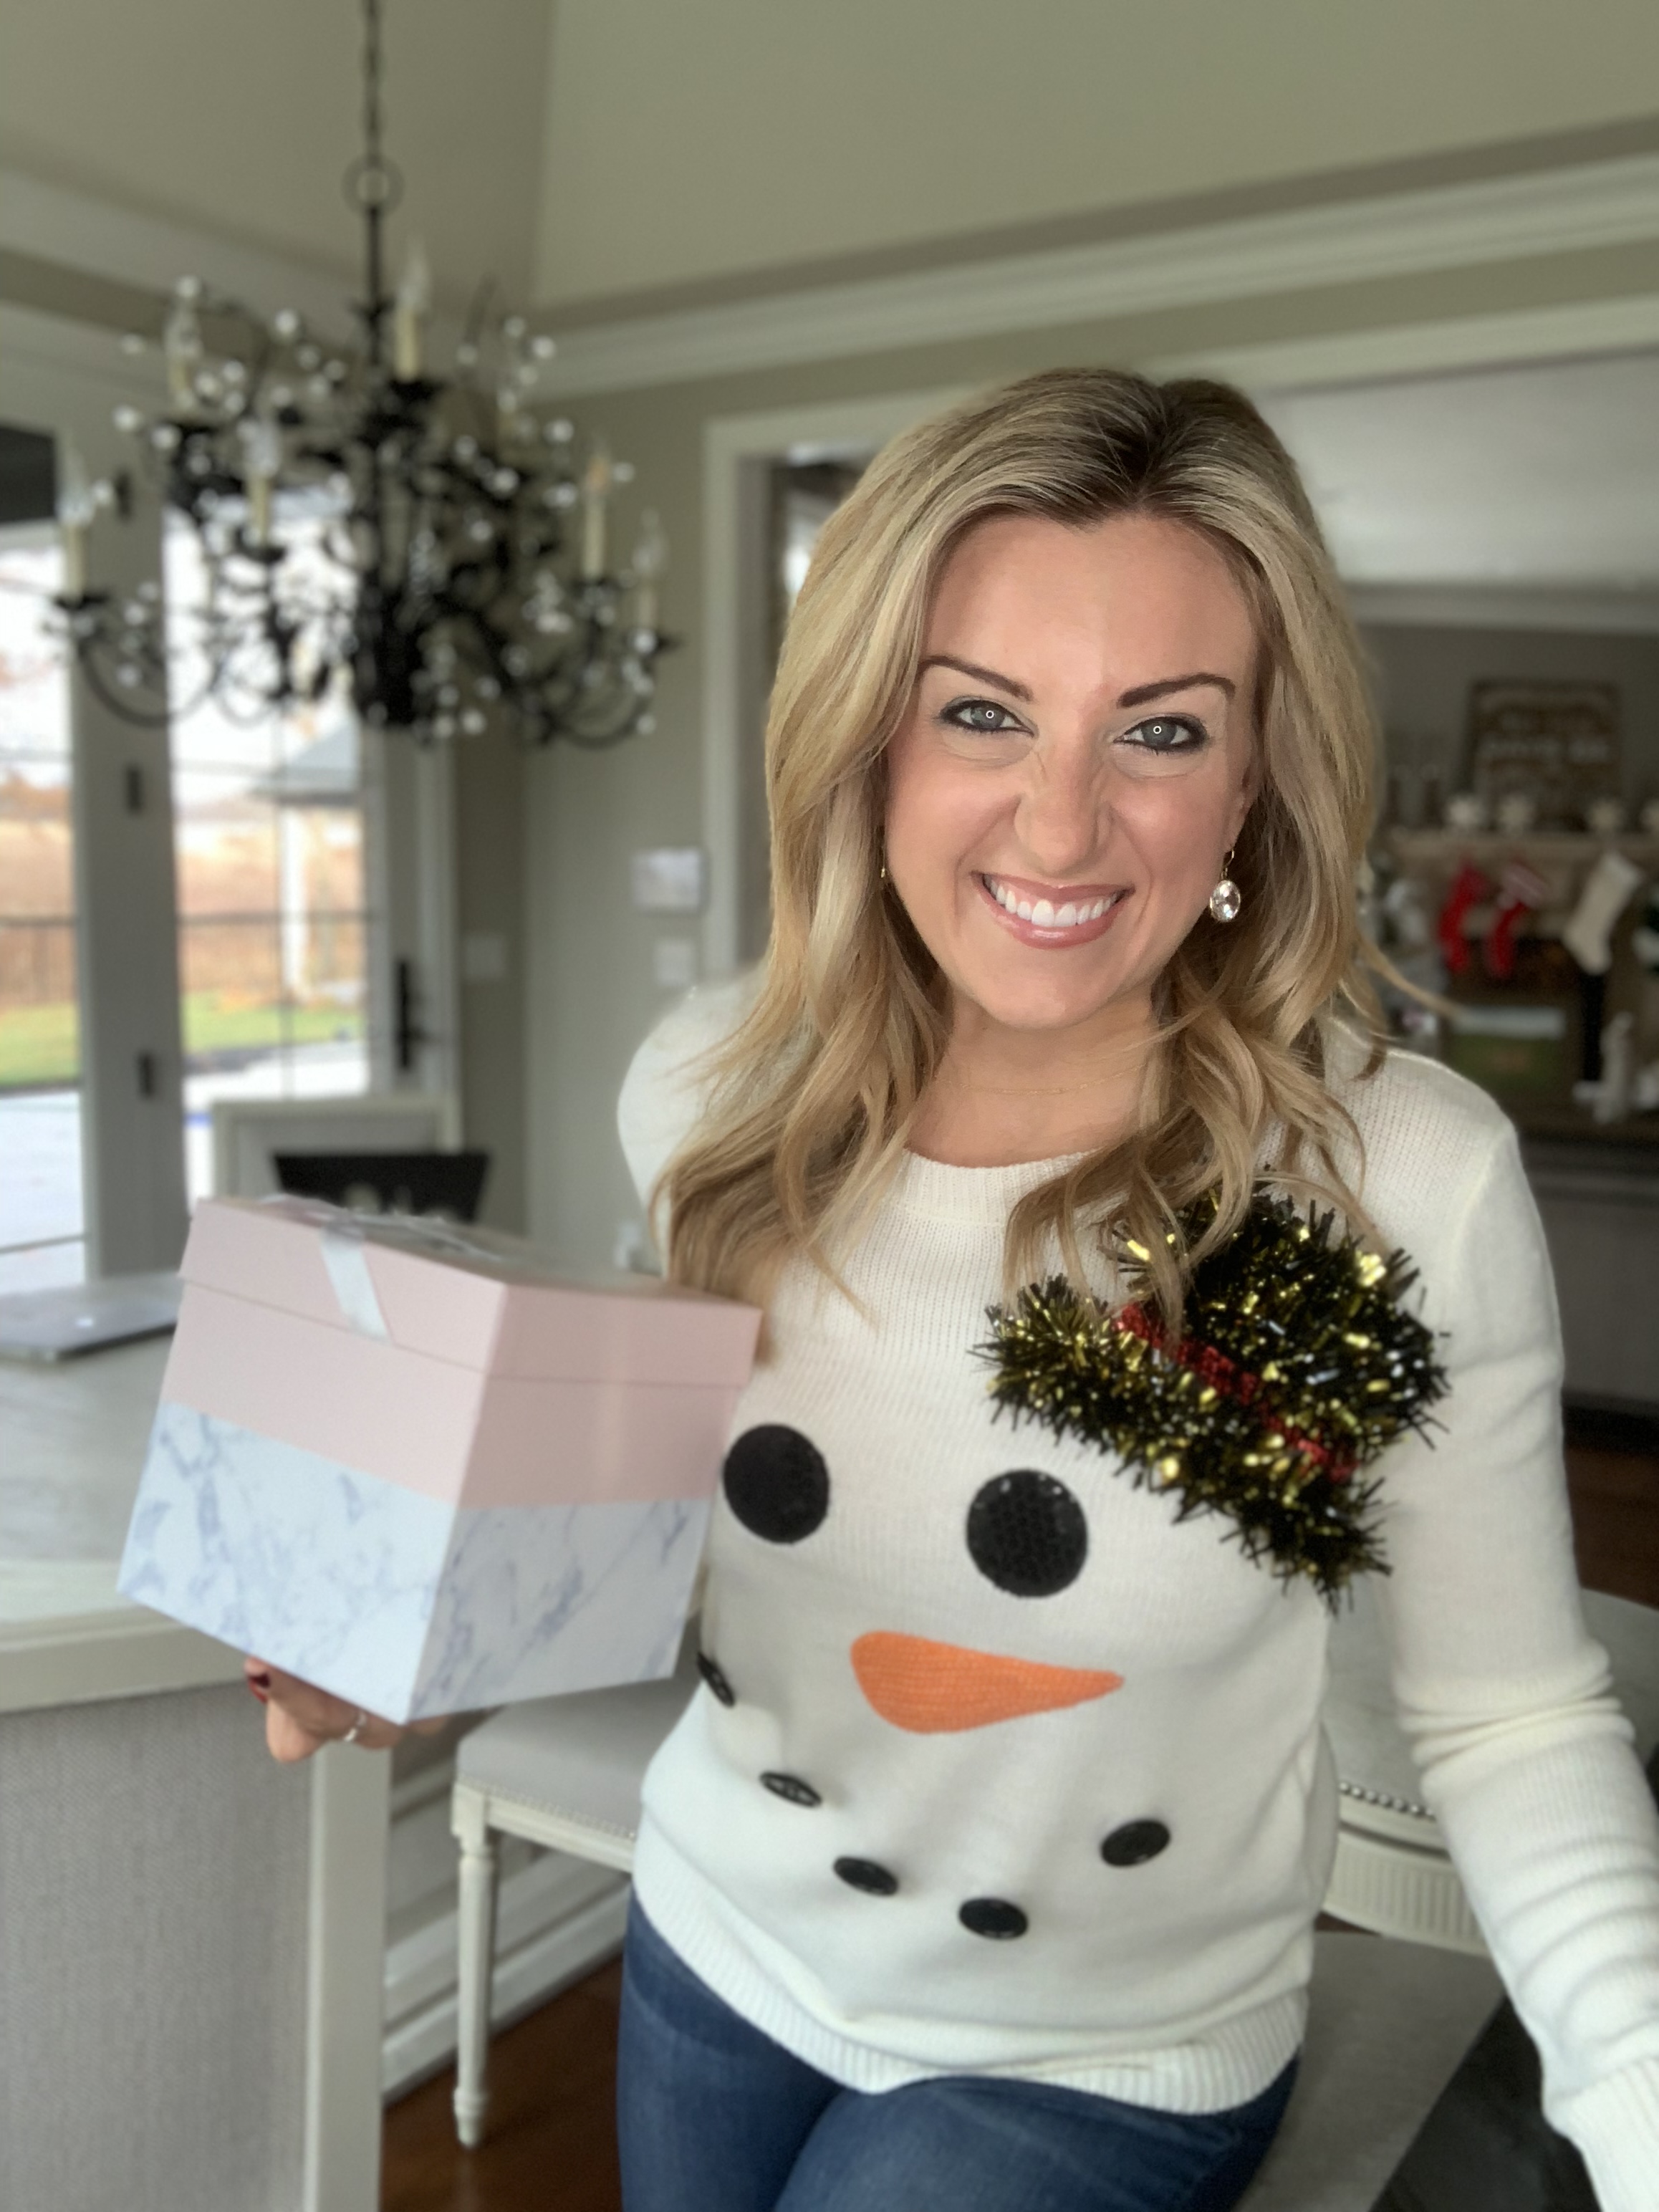 How I Paid Cash For My Holiday Gifts With My Online Business